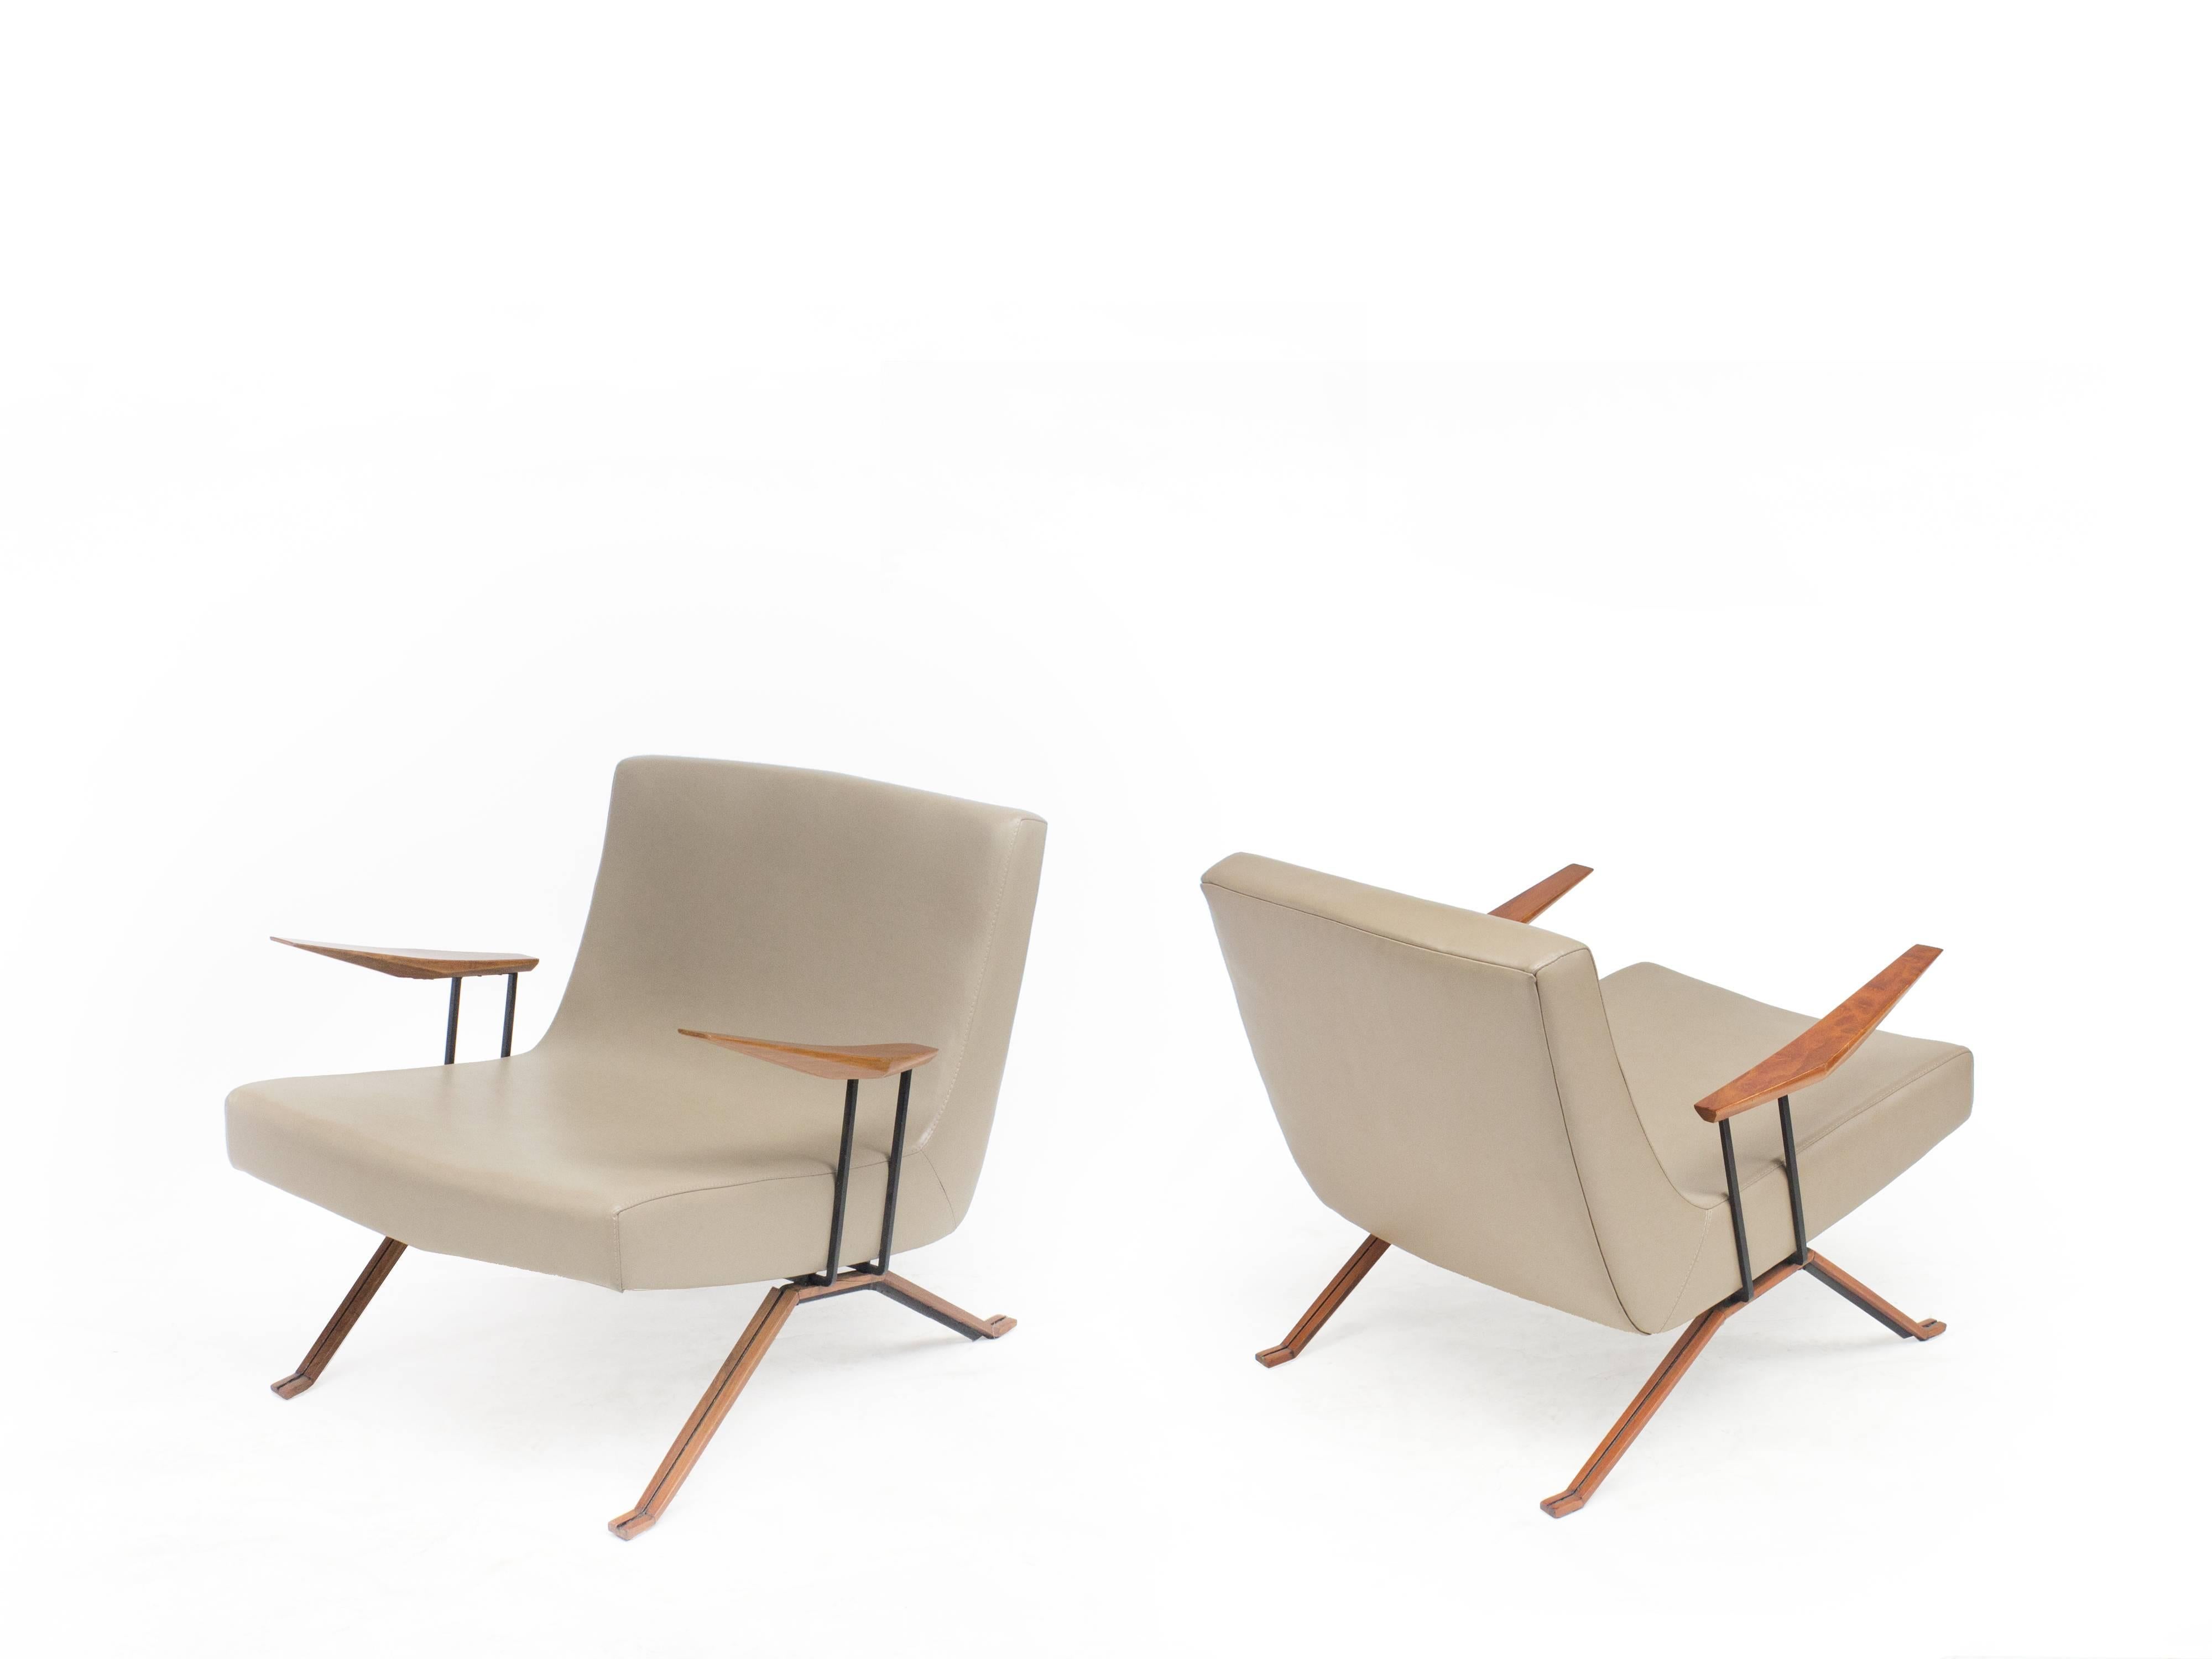 The MP-1 armchair, in this midcentury Brazilian style, was Percival Lafer's first successful project.

The MP-001 was a lightweight modern-looking piece whose origins are taught at the architectural college on the reinforced concrete by architect